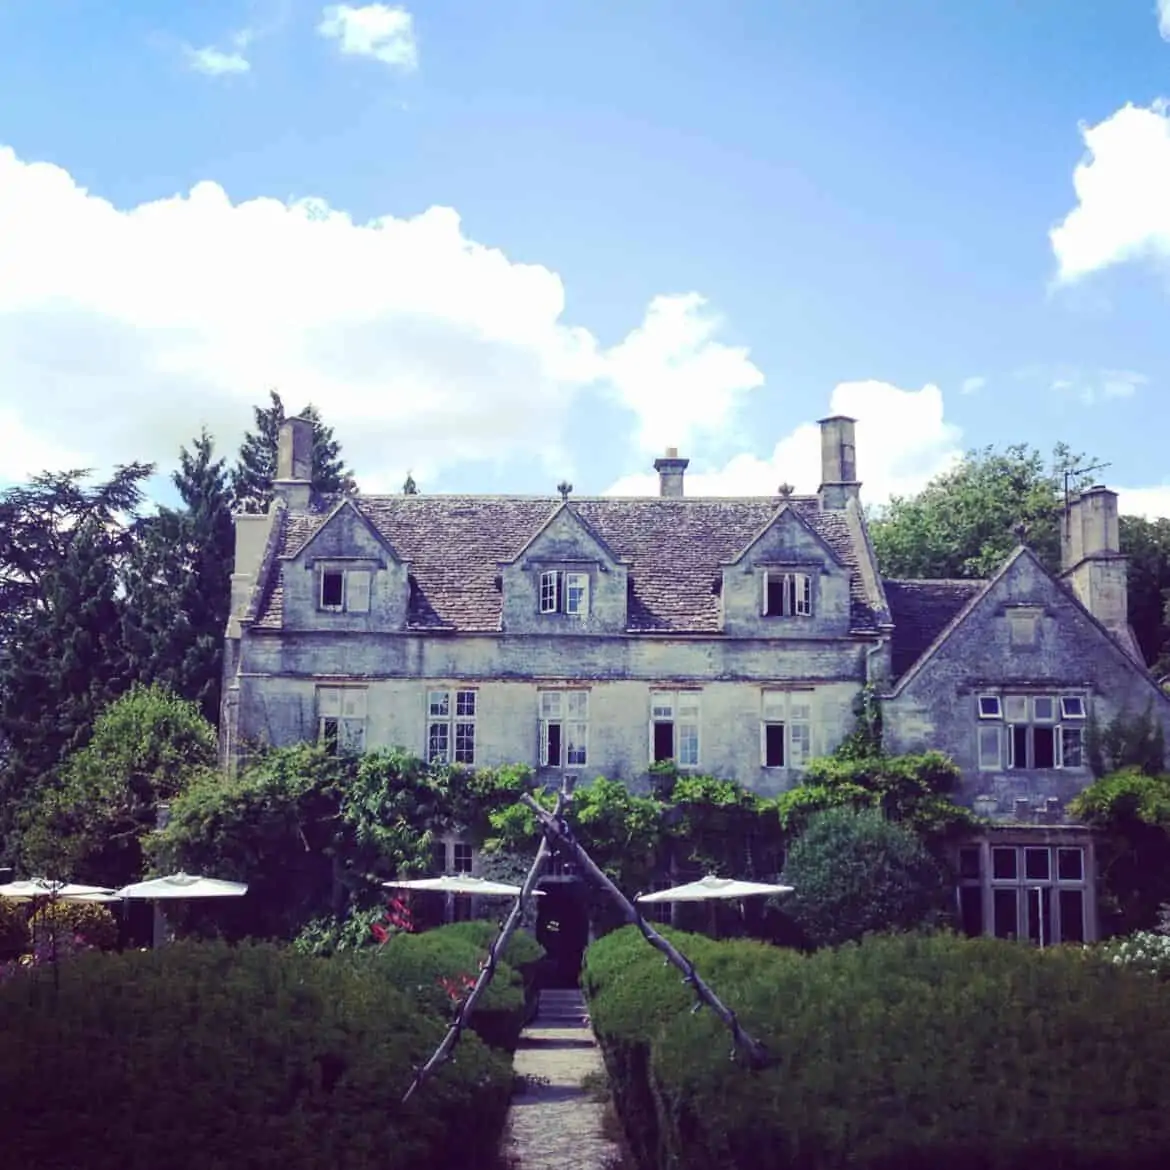 The Barnsley House in Cotswolds